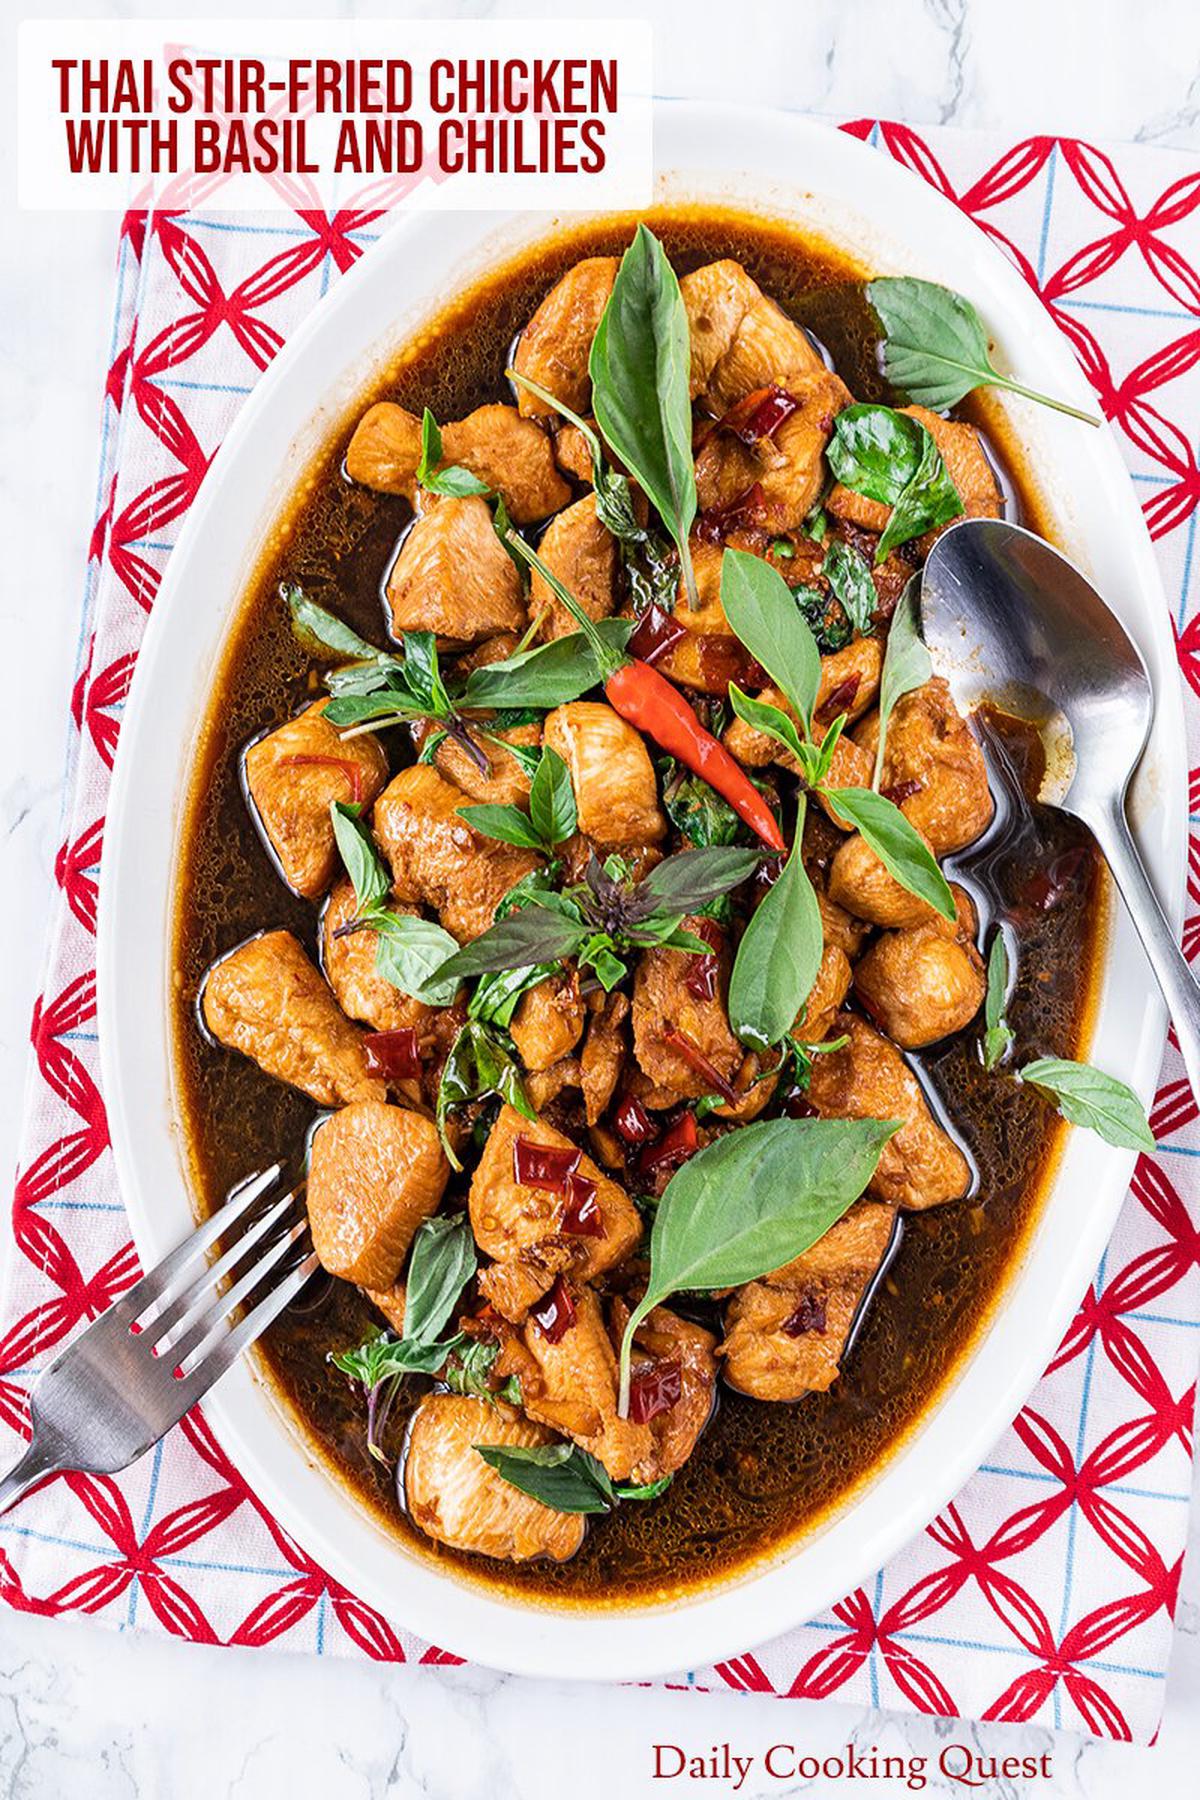 Thai Stir-Fried Chicken with Basil and Chilies.